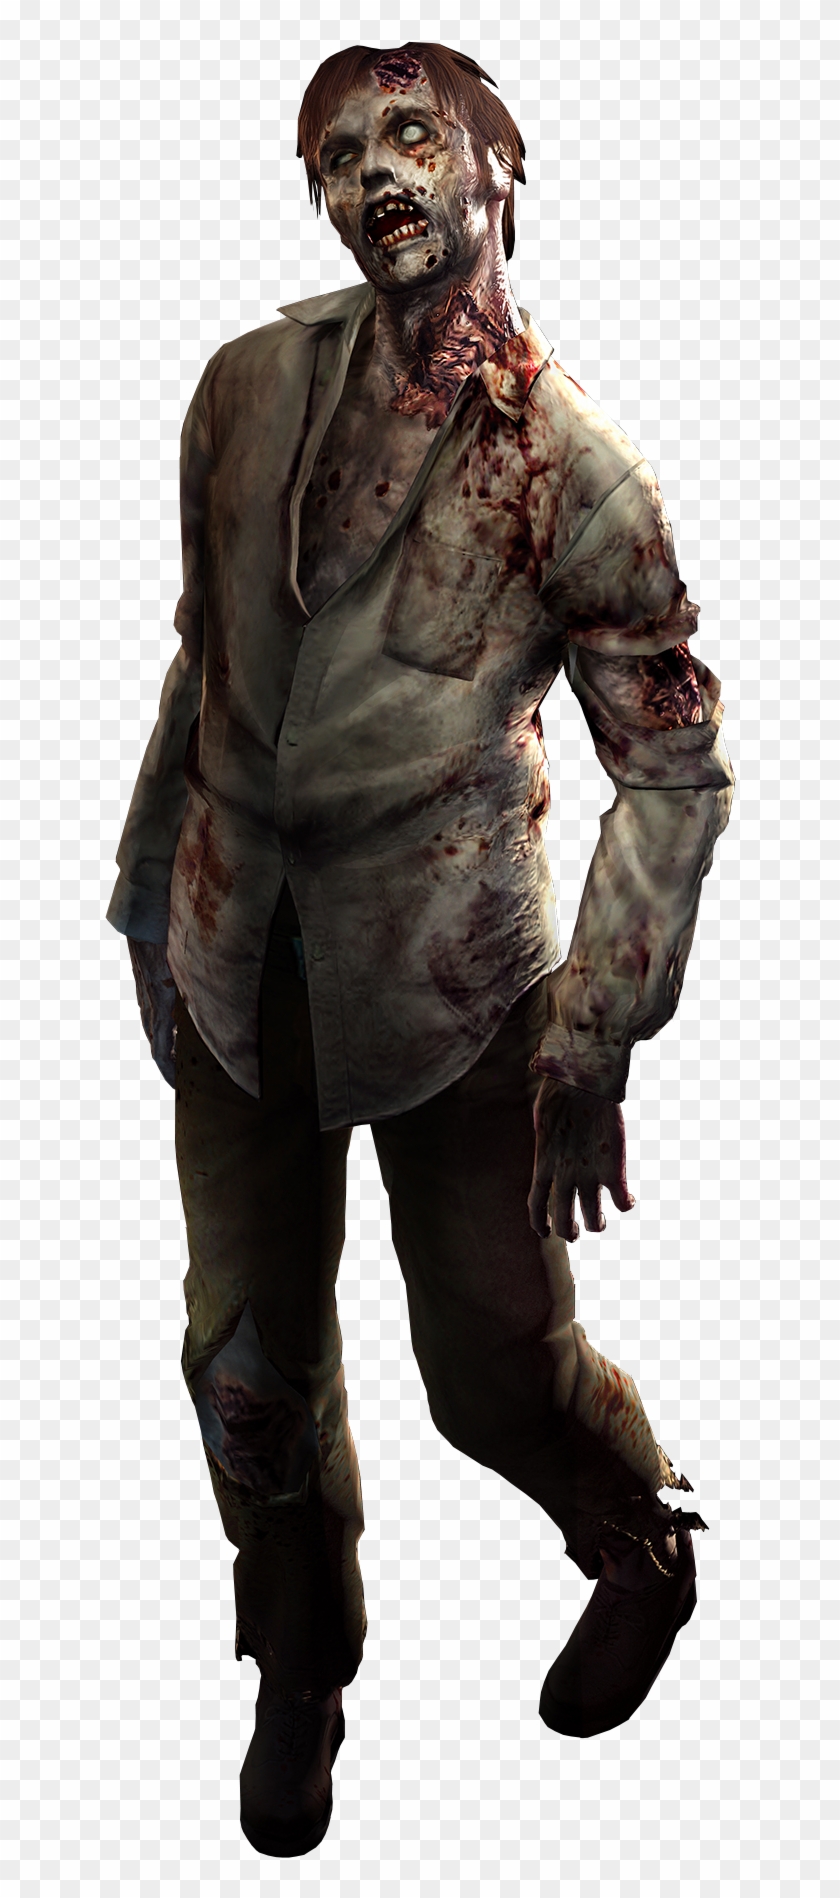 Zombie - Resident Evil Gamecube Cover Clipart #436513